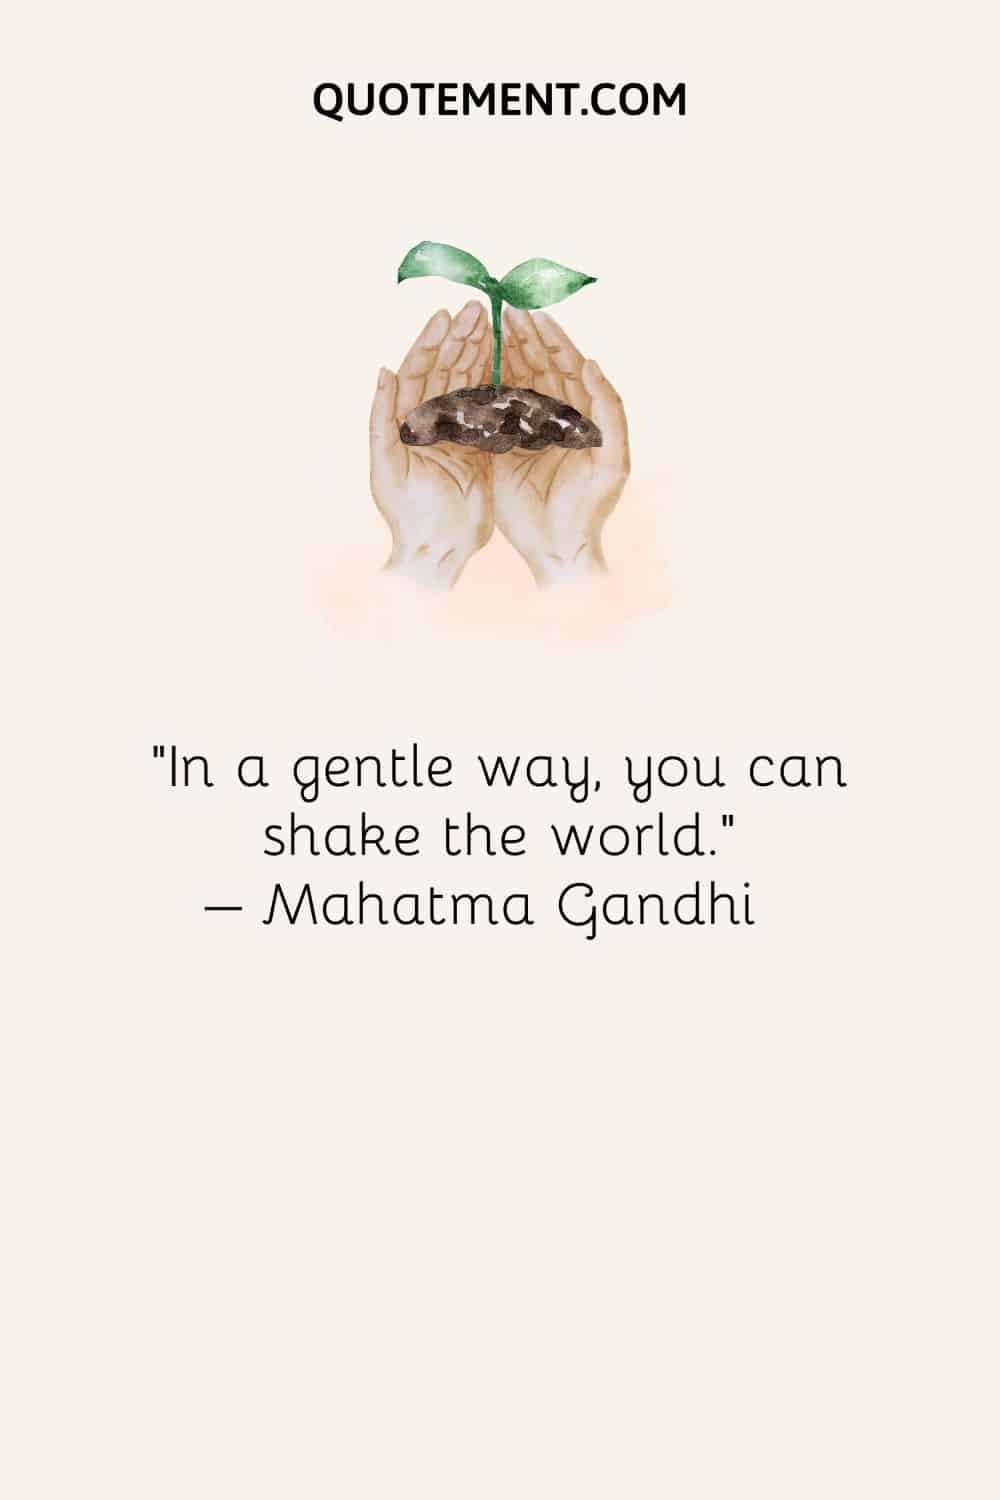 In a gentle way, you can shake the world. - Gandhi